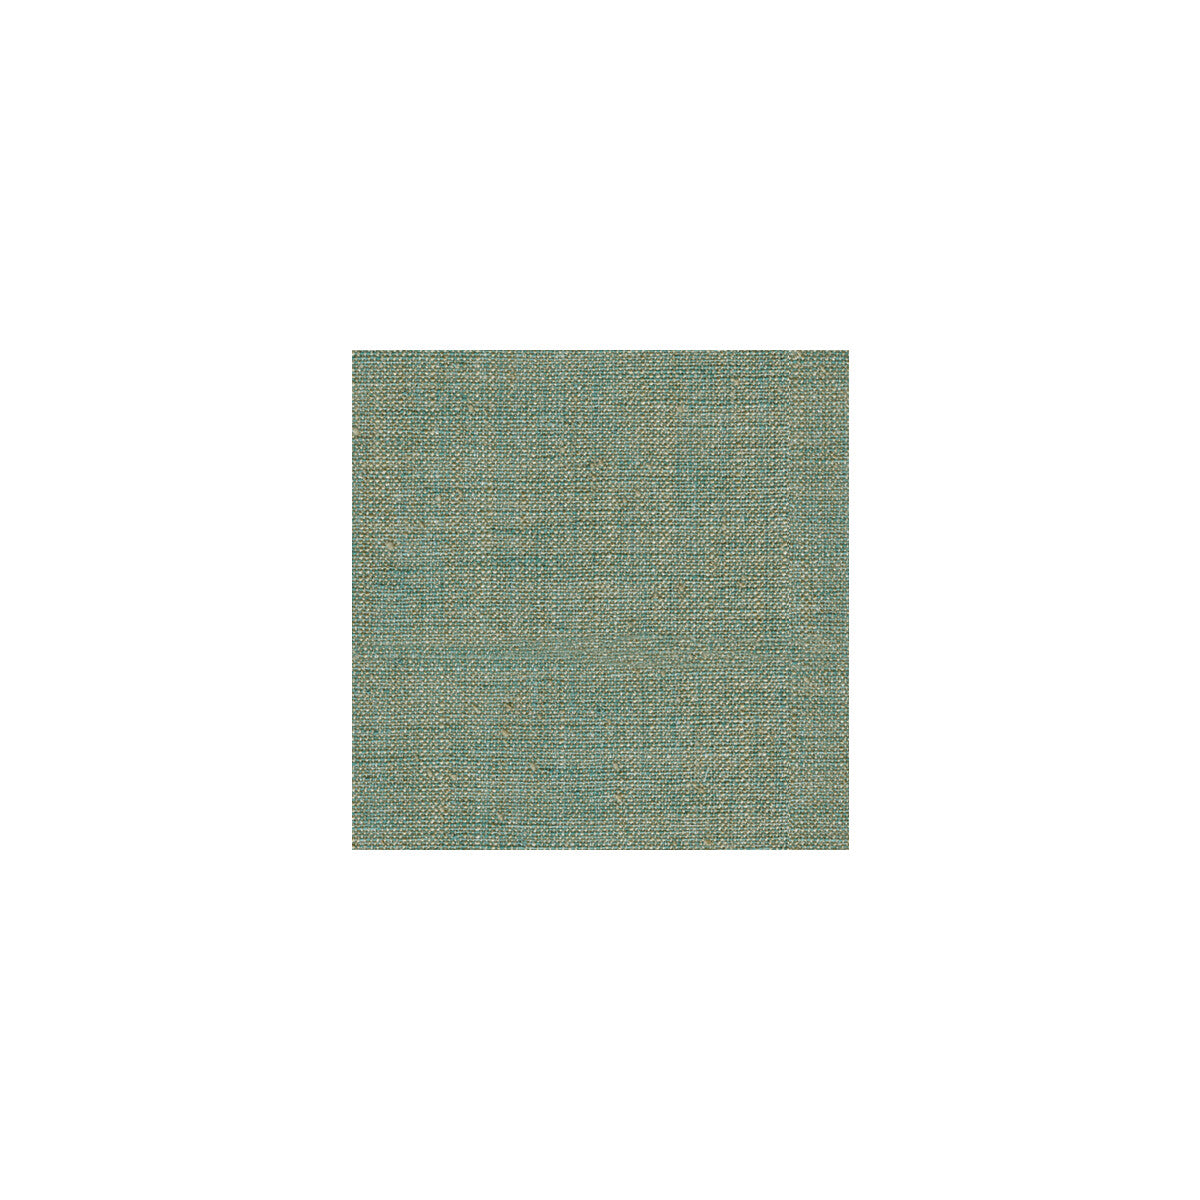 Matta fabric in turq color - pattern 31270.135.0 - by Kravet Design in the The Echo Design collection